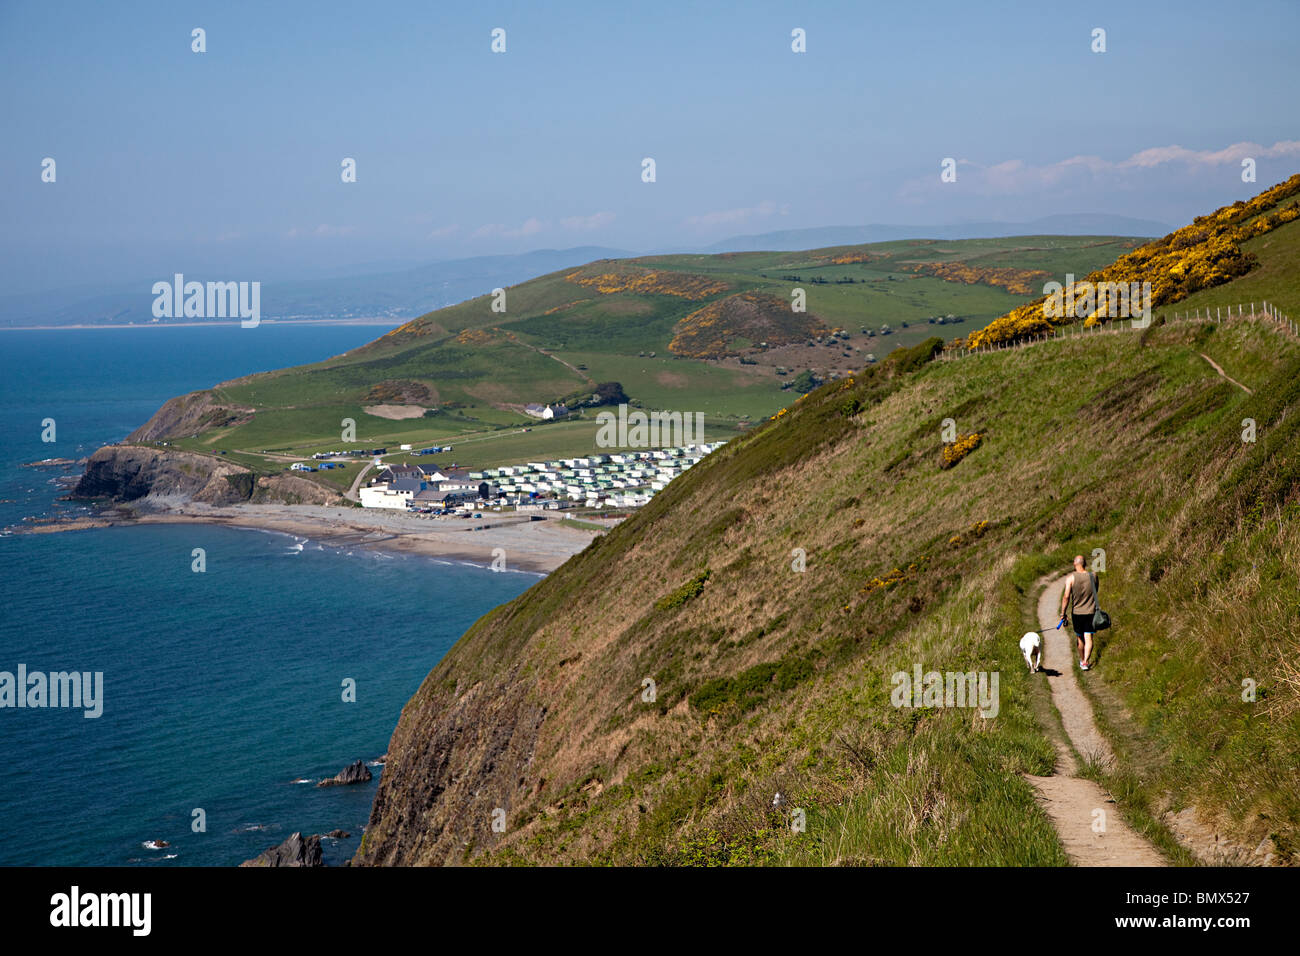 Man walking dog on coast path on cliffs with caravan holiday park in distance Aberystwyth Wales UK Stock Photo